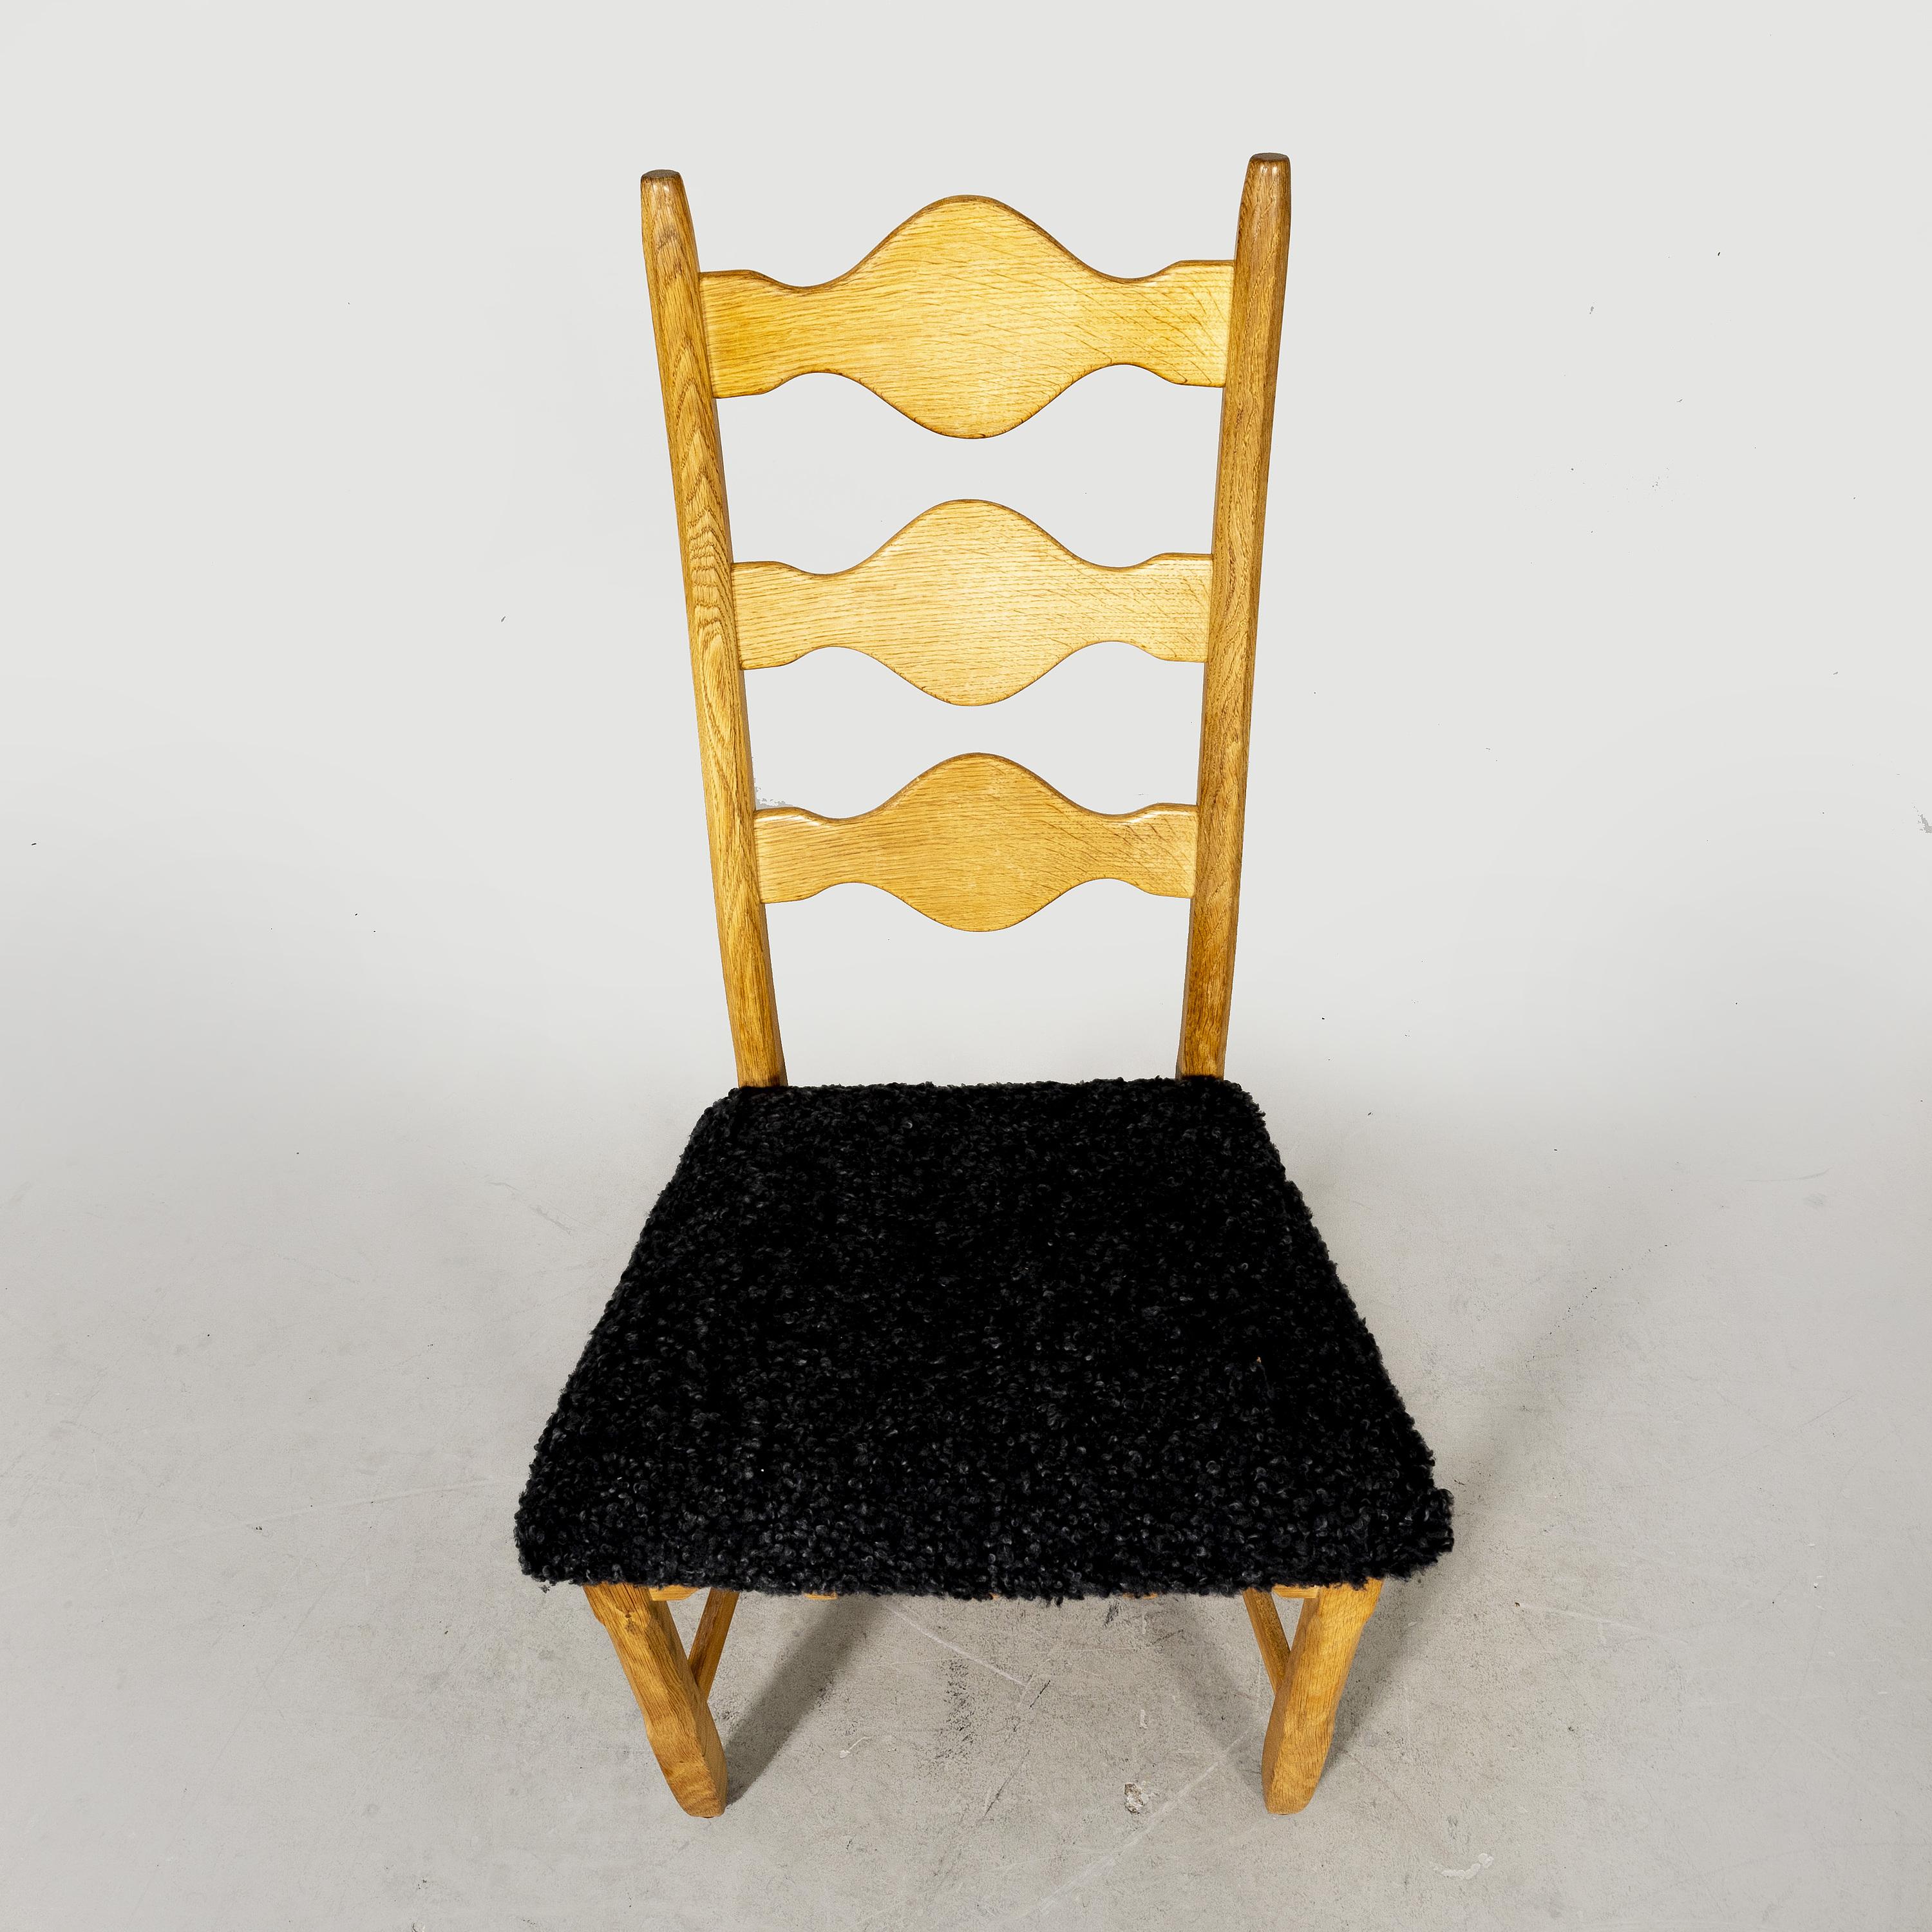 A set of 8 dining chairs was designed by Henning (Henry) Kjærnulf in the 1960s. The chairs were produced by Nyrup Møbelfabrik in Denmark and form a rare variant on Kjærnulf 'Razorblade' series The set consists of 8 chairs made of solid oak. The